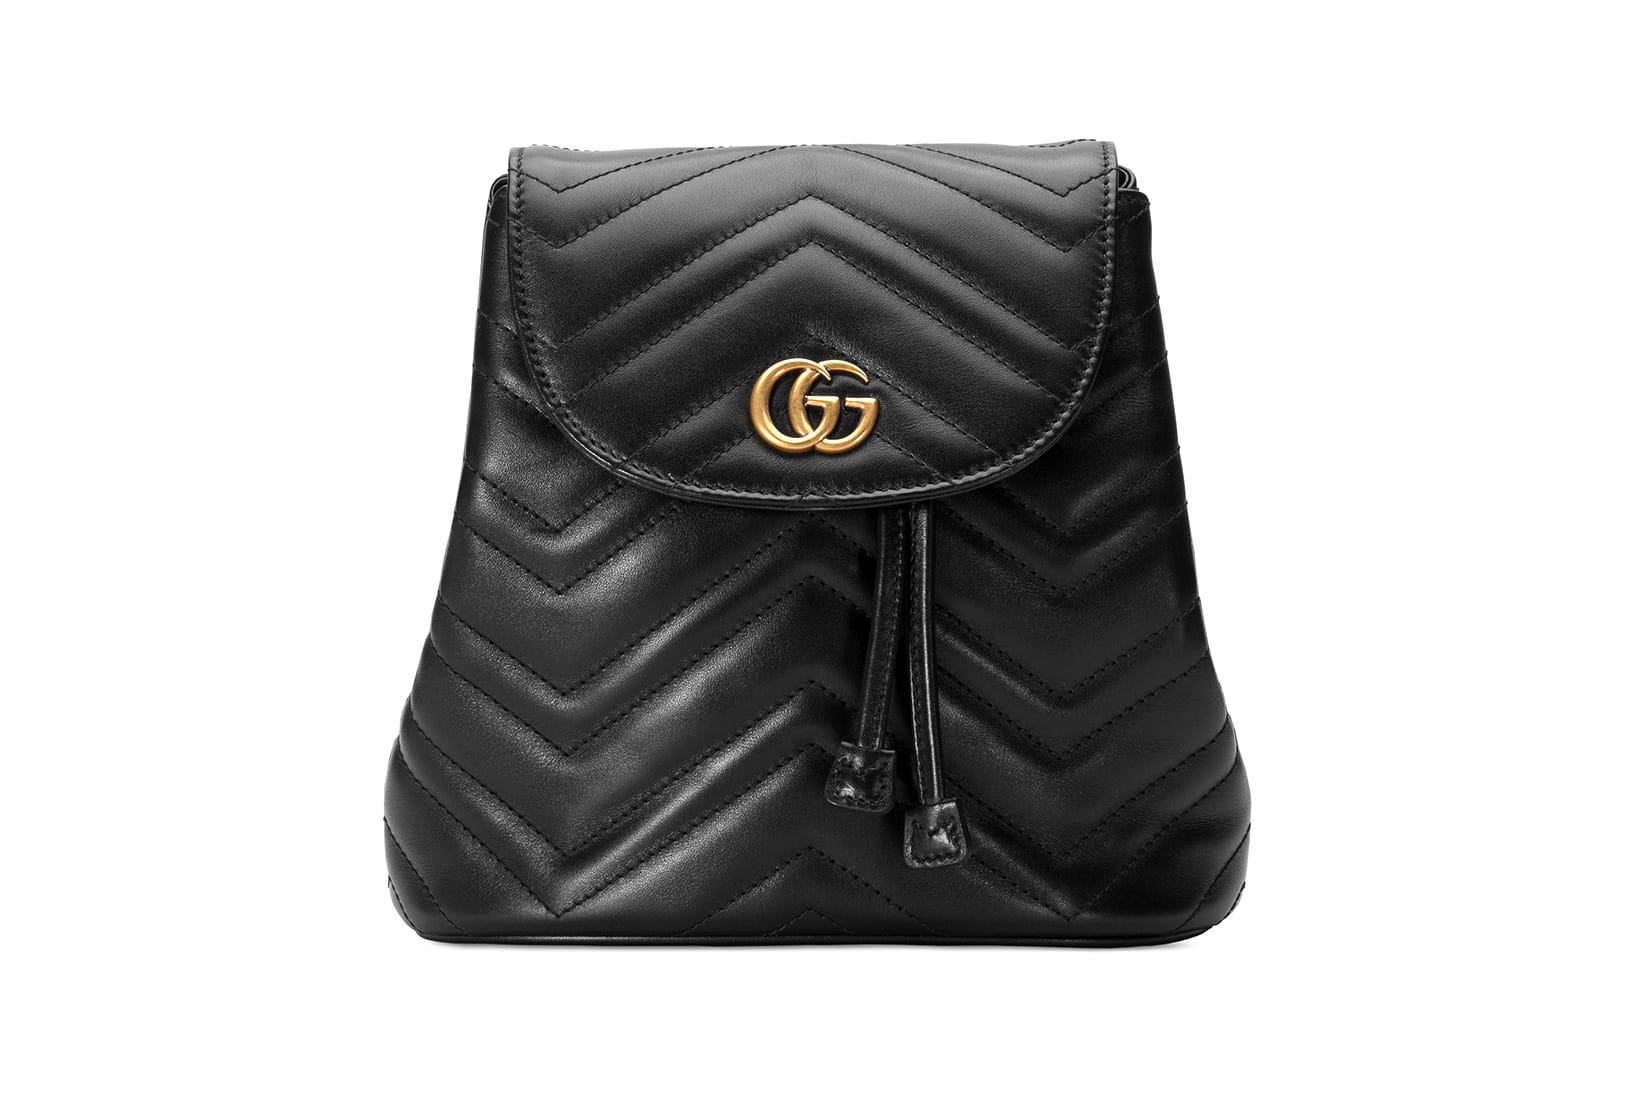 gucci backpack gg marmont